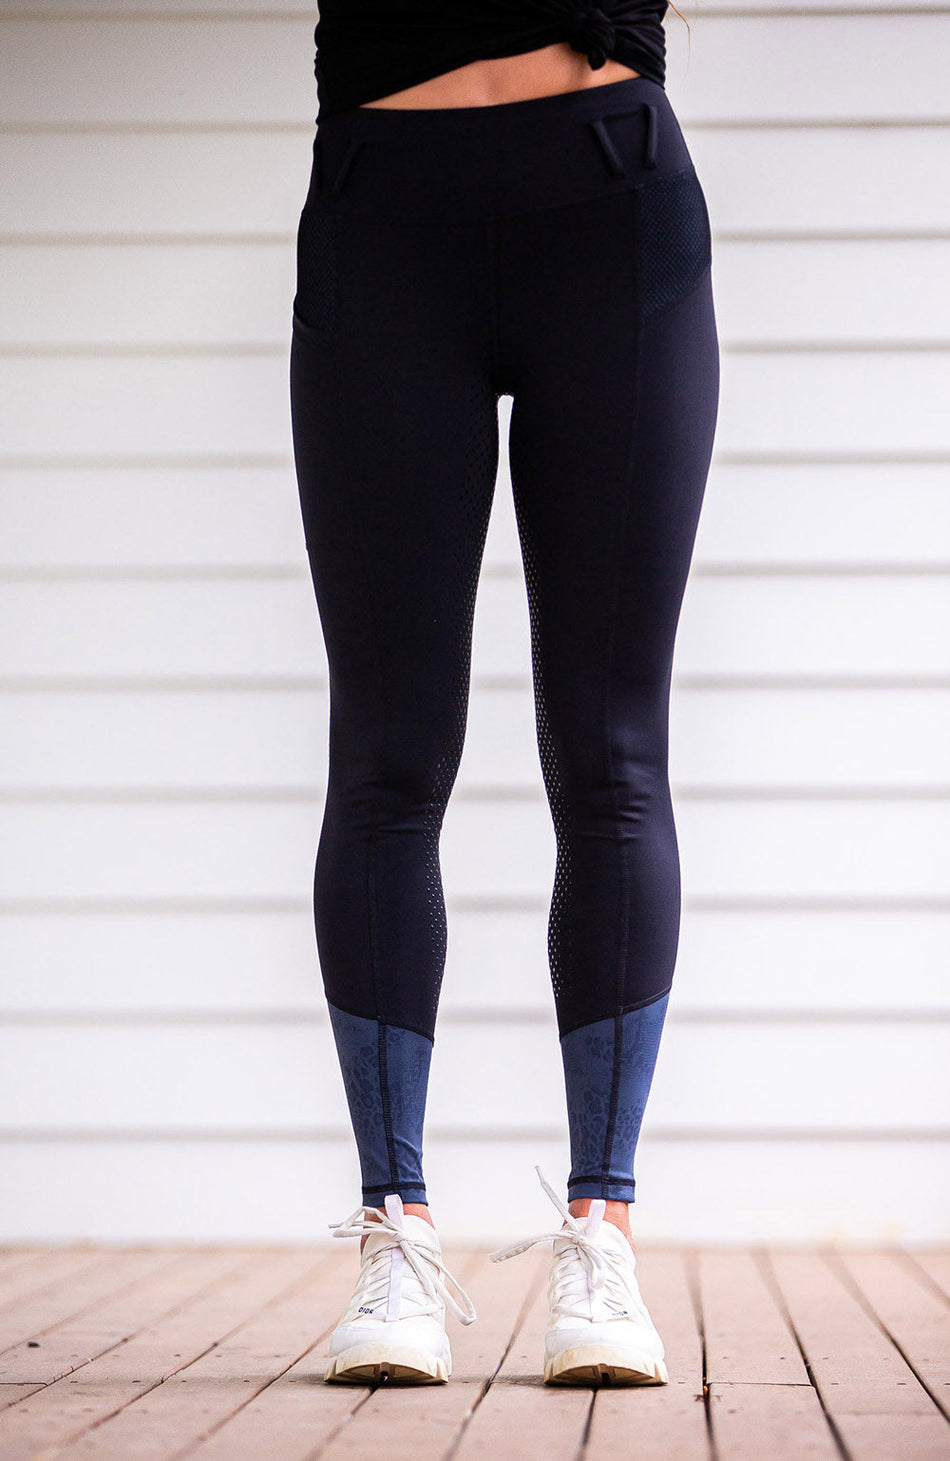 Bare Equestrian - Youth Performance Riding Tights in Old Navy